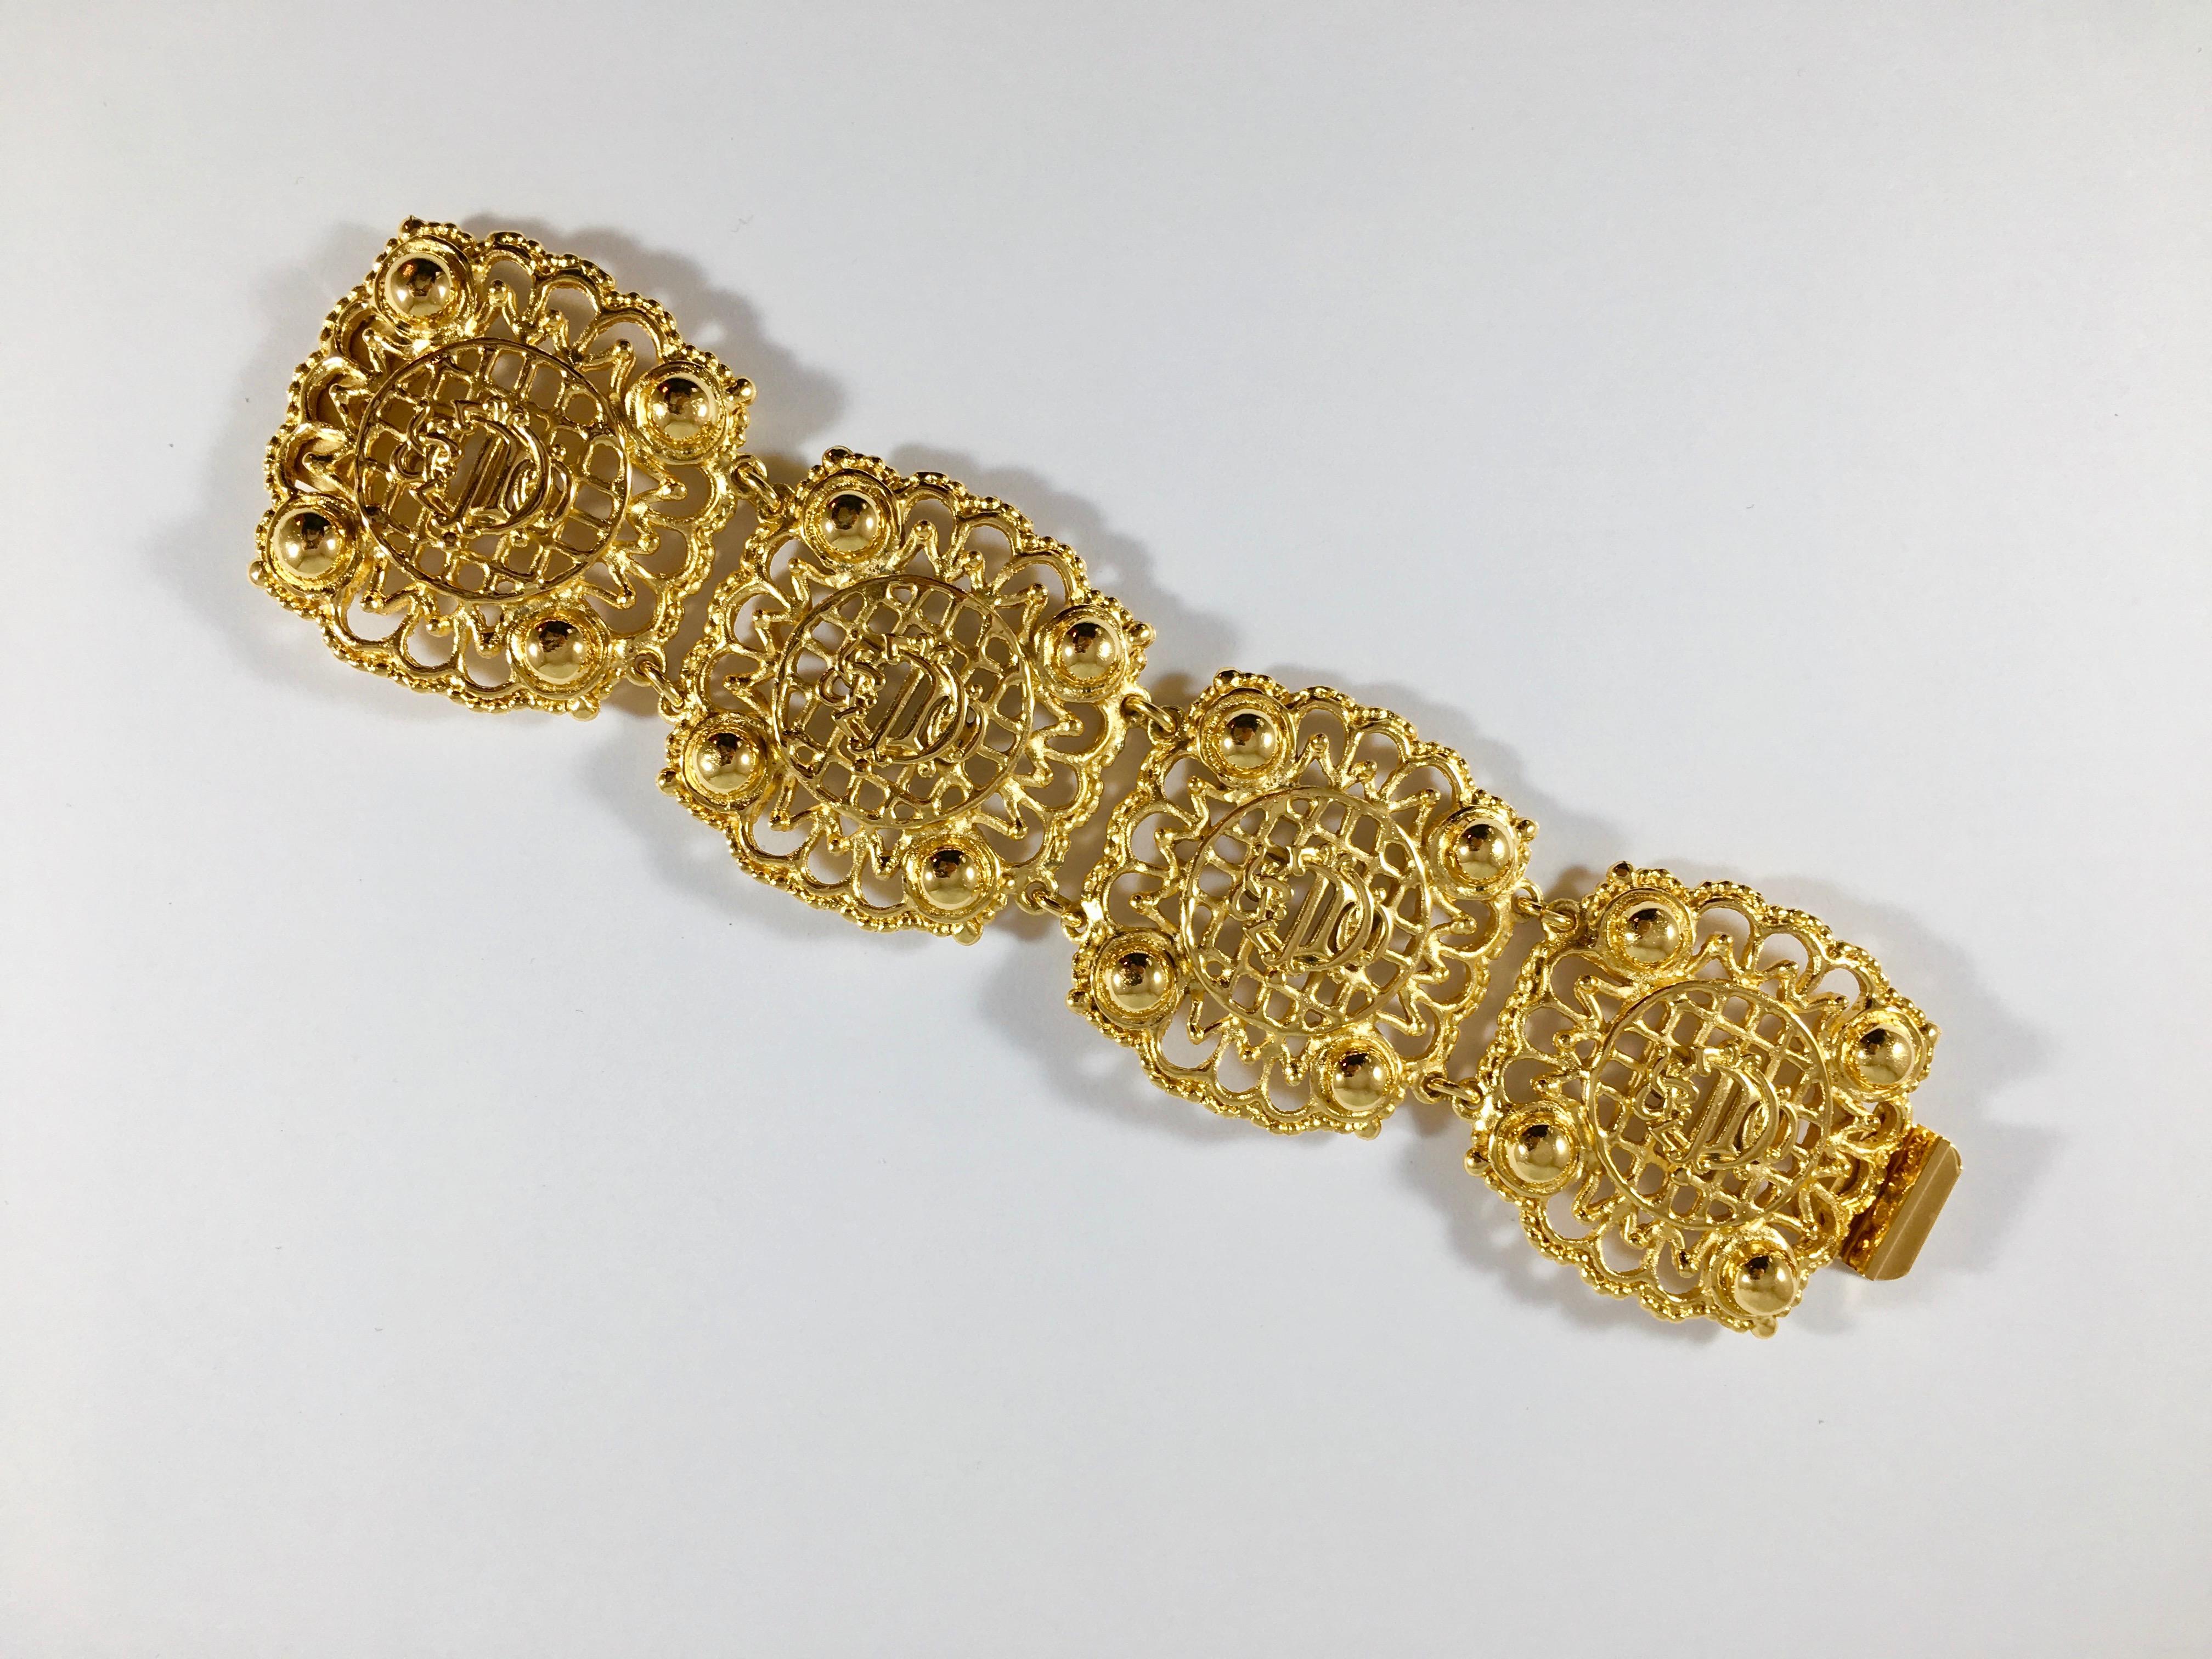 This is a beautiful 1980s Christian Dior gold-tone logo bracelet. It features the interlocking Christian Dior monogram used by Dior since the 1950s. the monogram is placed in the center of four open-work pieces that make up the bracelet. It features